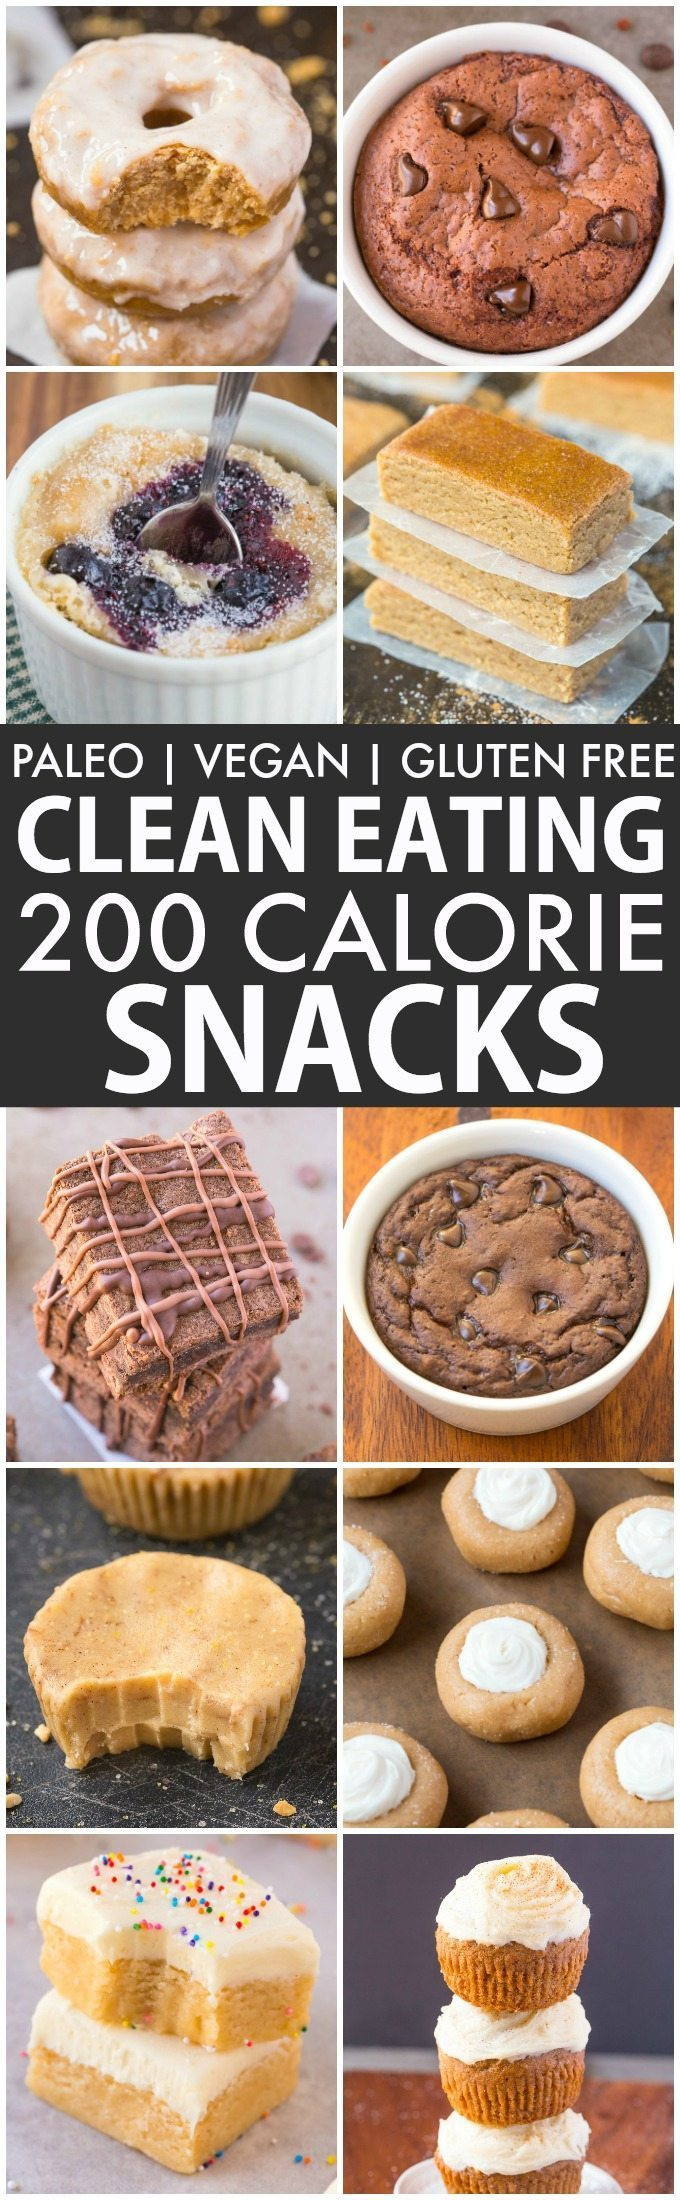 Filling Healthy Snacks
 15 Healthy Desserts and Snacks Under 200 Calories